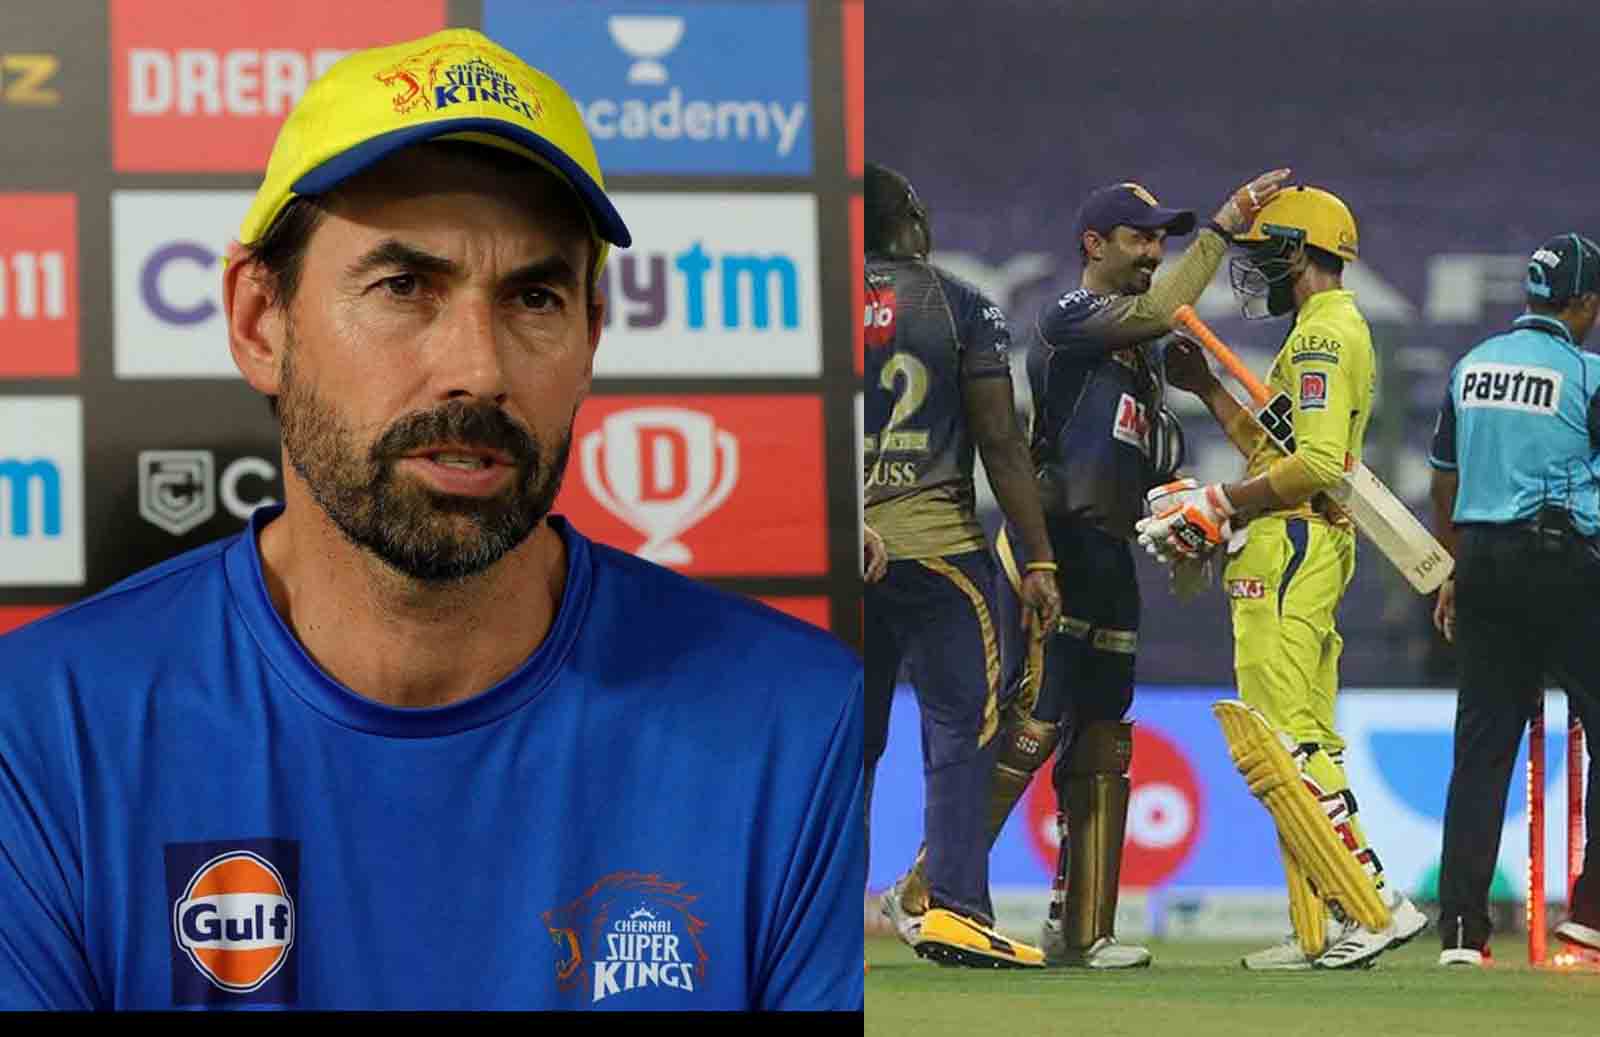 "KKR hung in there and put pressure on us,"- Stephen Fleming disappointed with CSK's batting performance